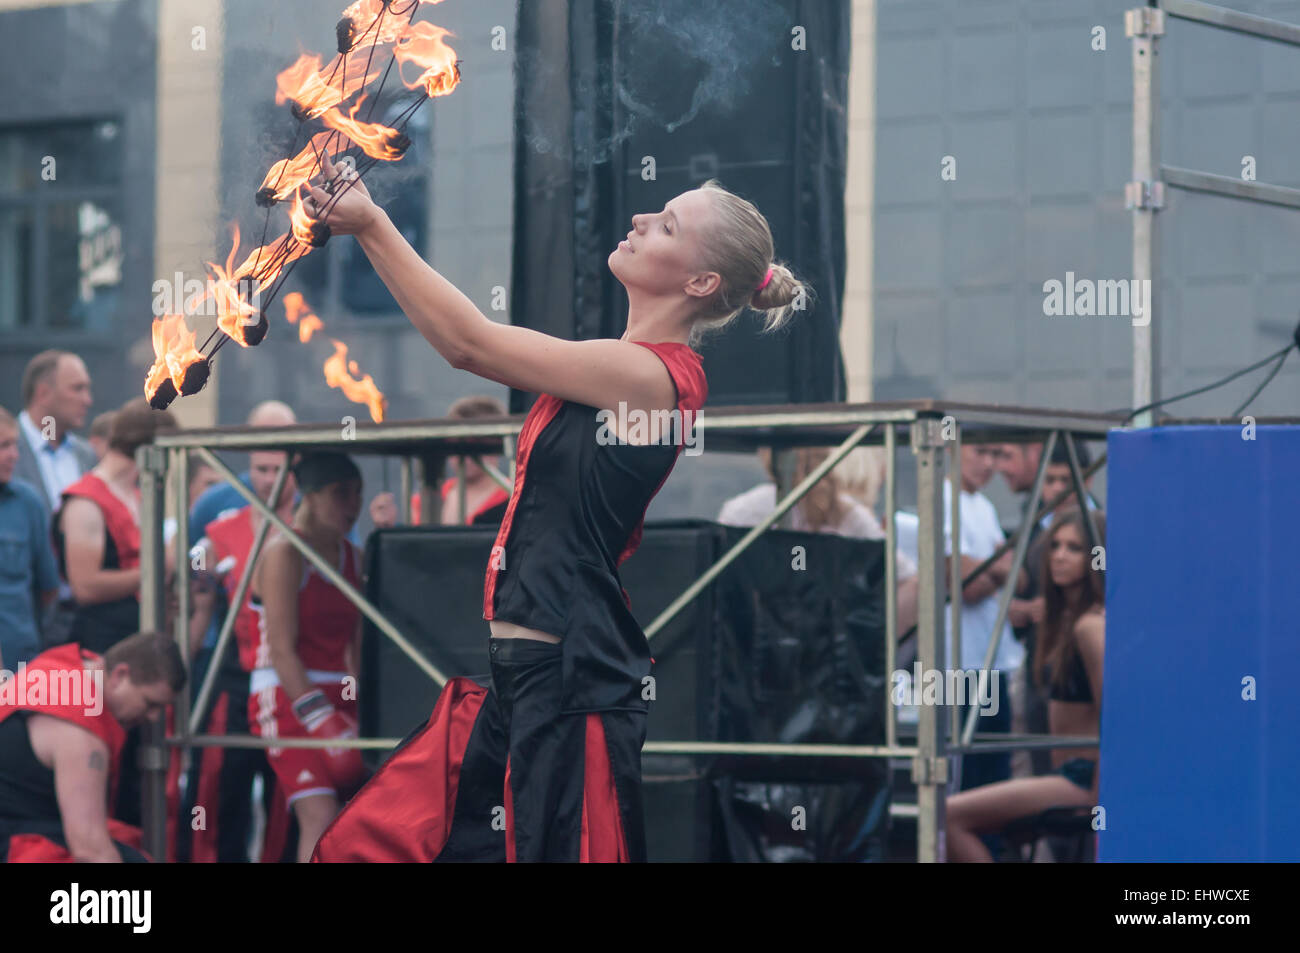 Orenburg, Orenburg region, Russia - 25.07.2014: The girls performed a dance with burning torches during youth meetings in the bo Stock Photo